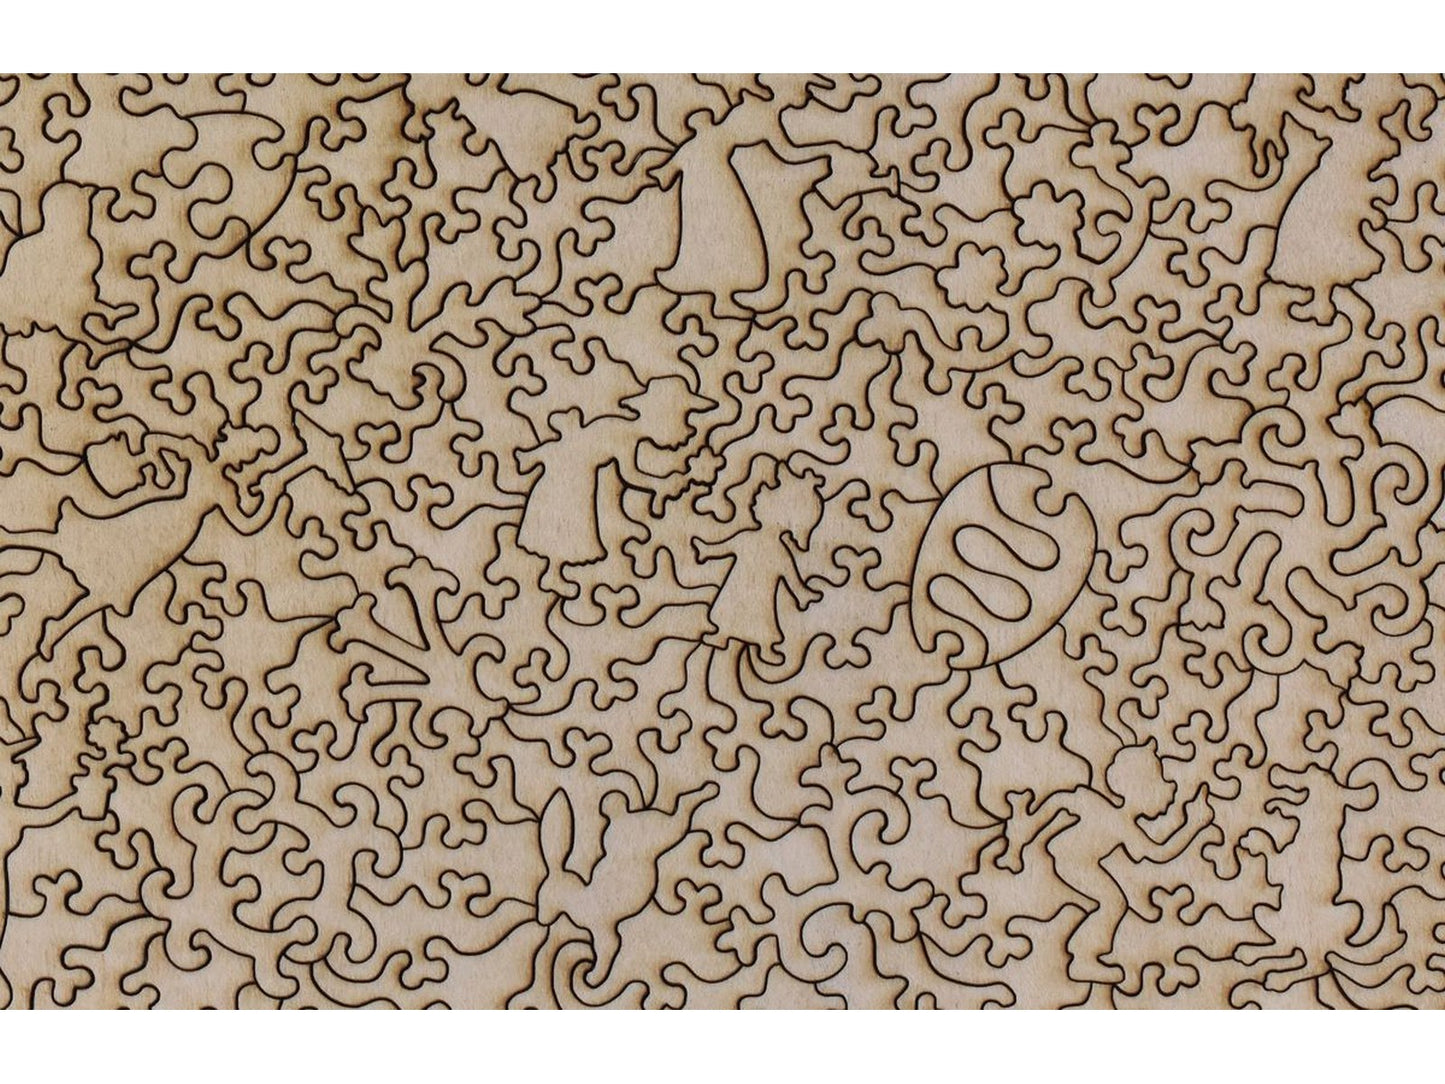 A closeup of the back of the puzzle, Hoppy Easter, showing the detail in the pieces.